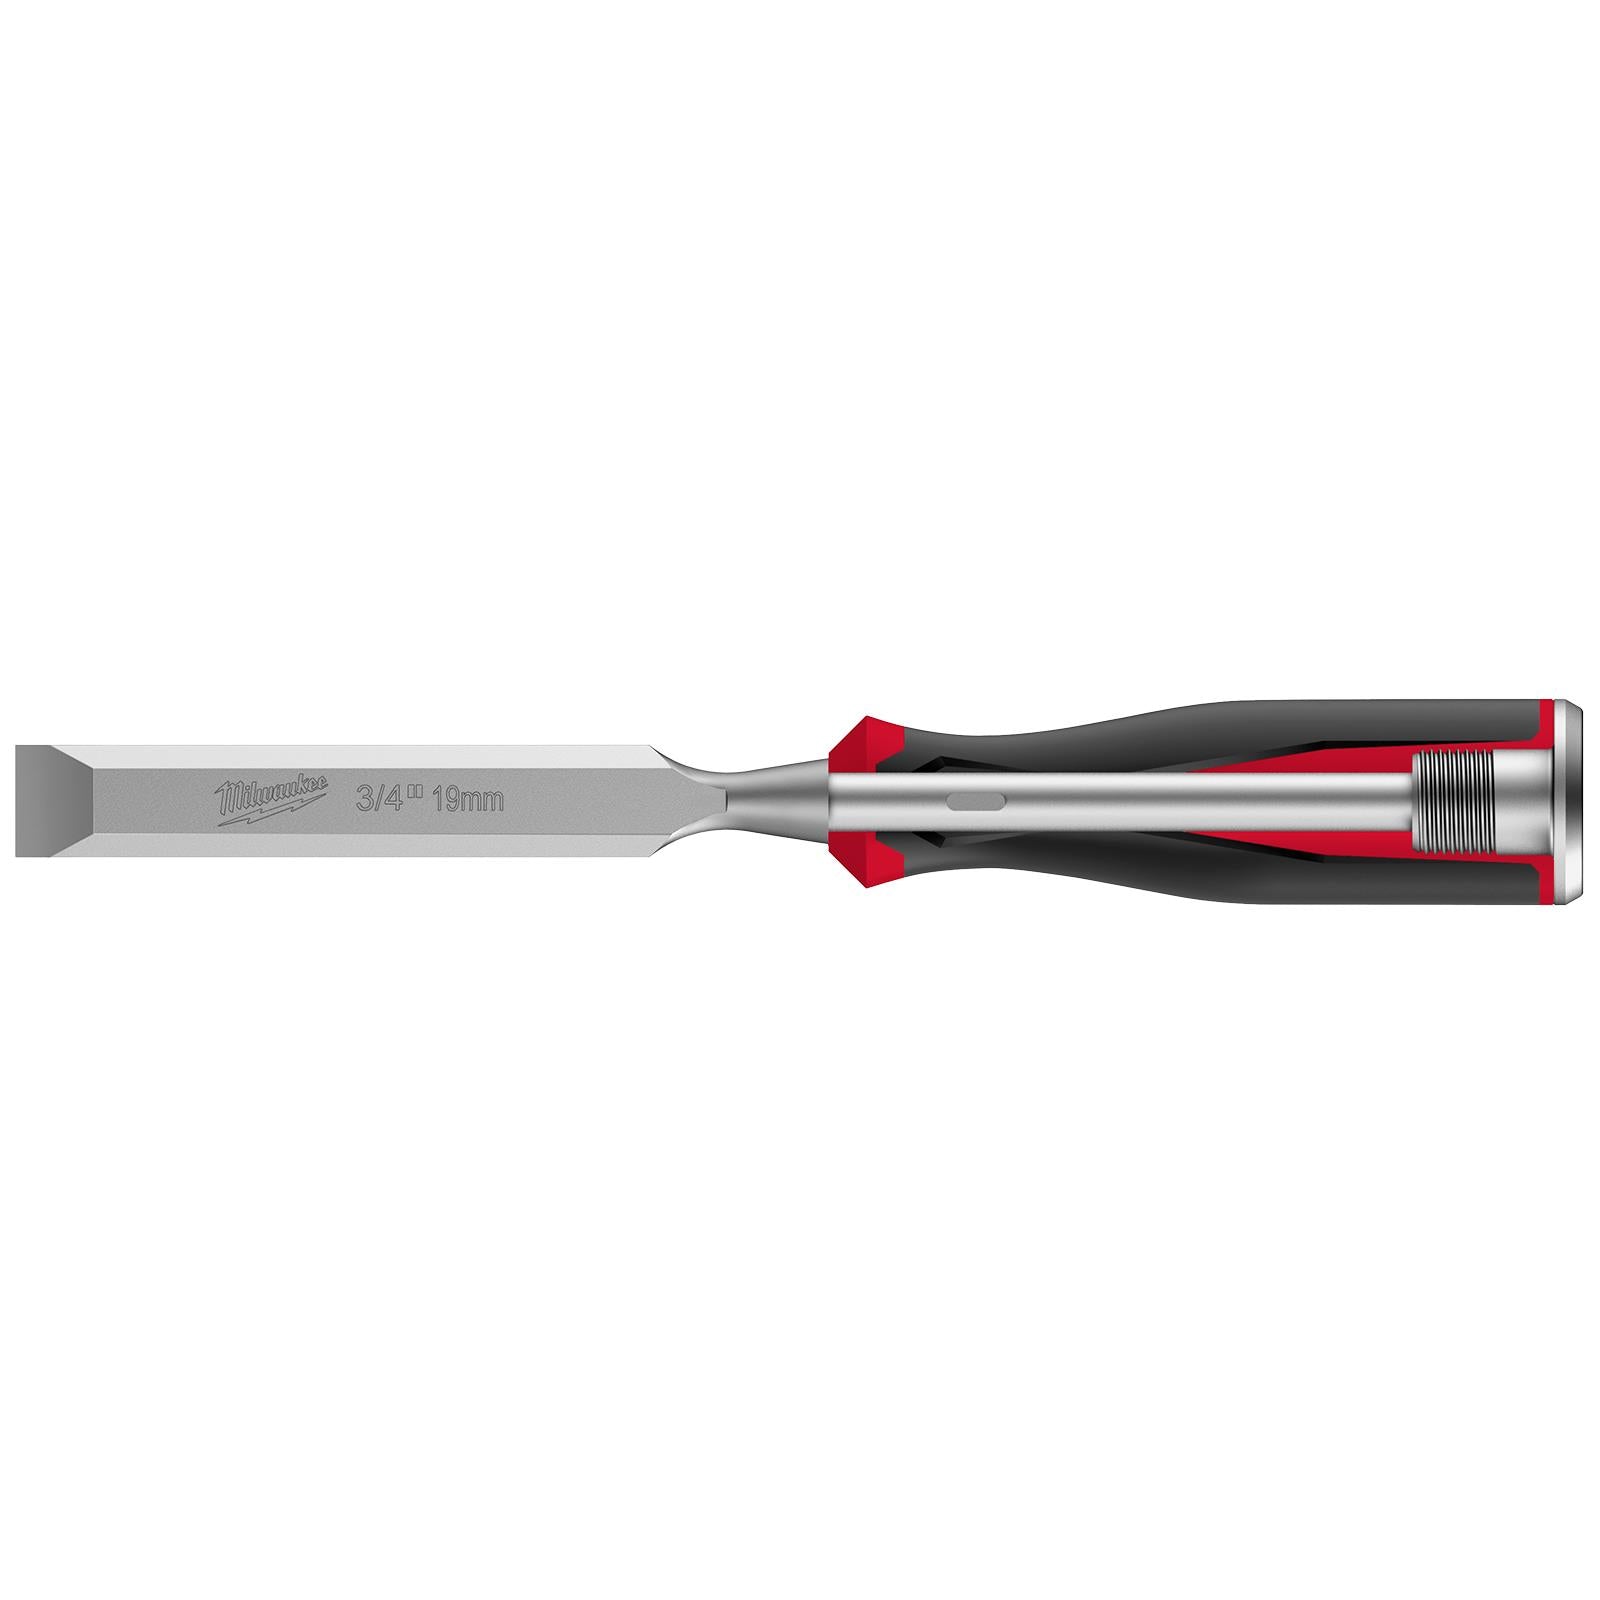 Milwaukee Beveled Edge Wood Chisel 19mm 3/4" All Metal Core with Striking Cap